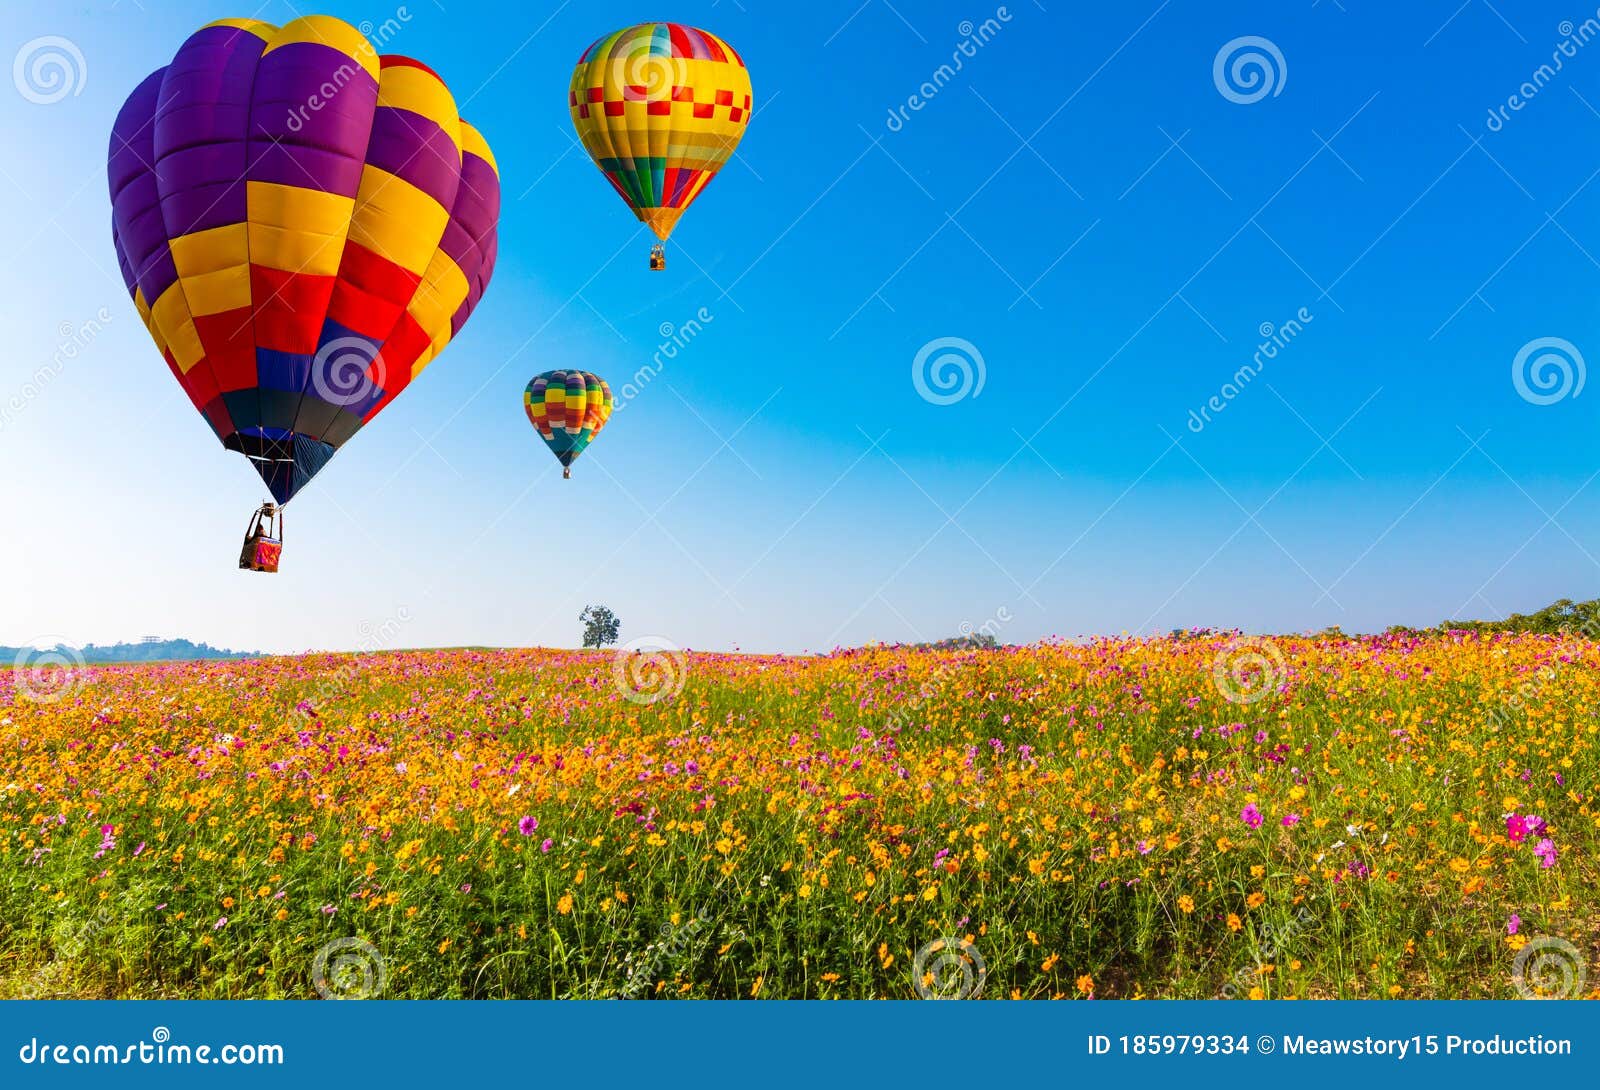 Beautiful Colors of the Hot Air Balloons Flying on the Cosmos Flower ...